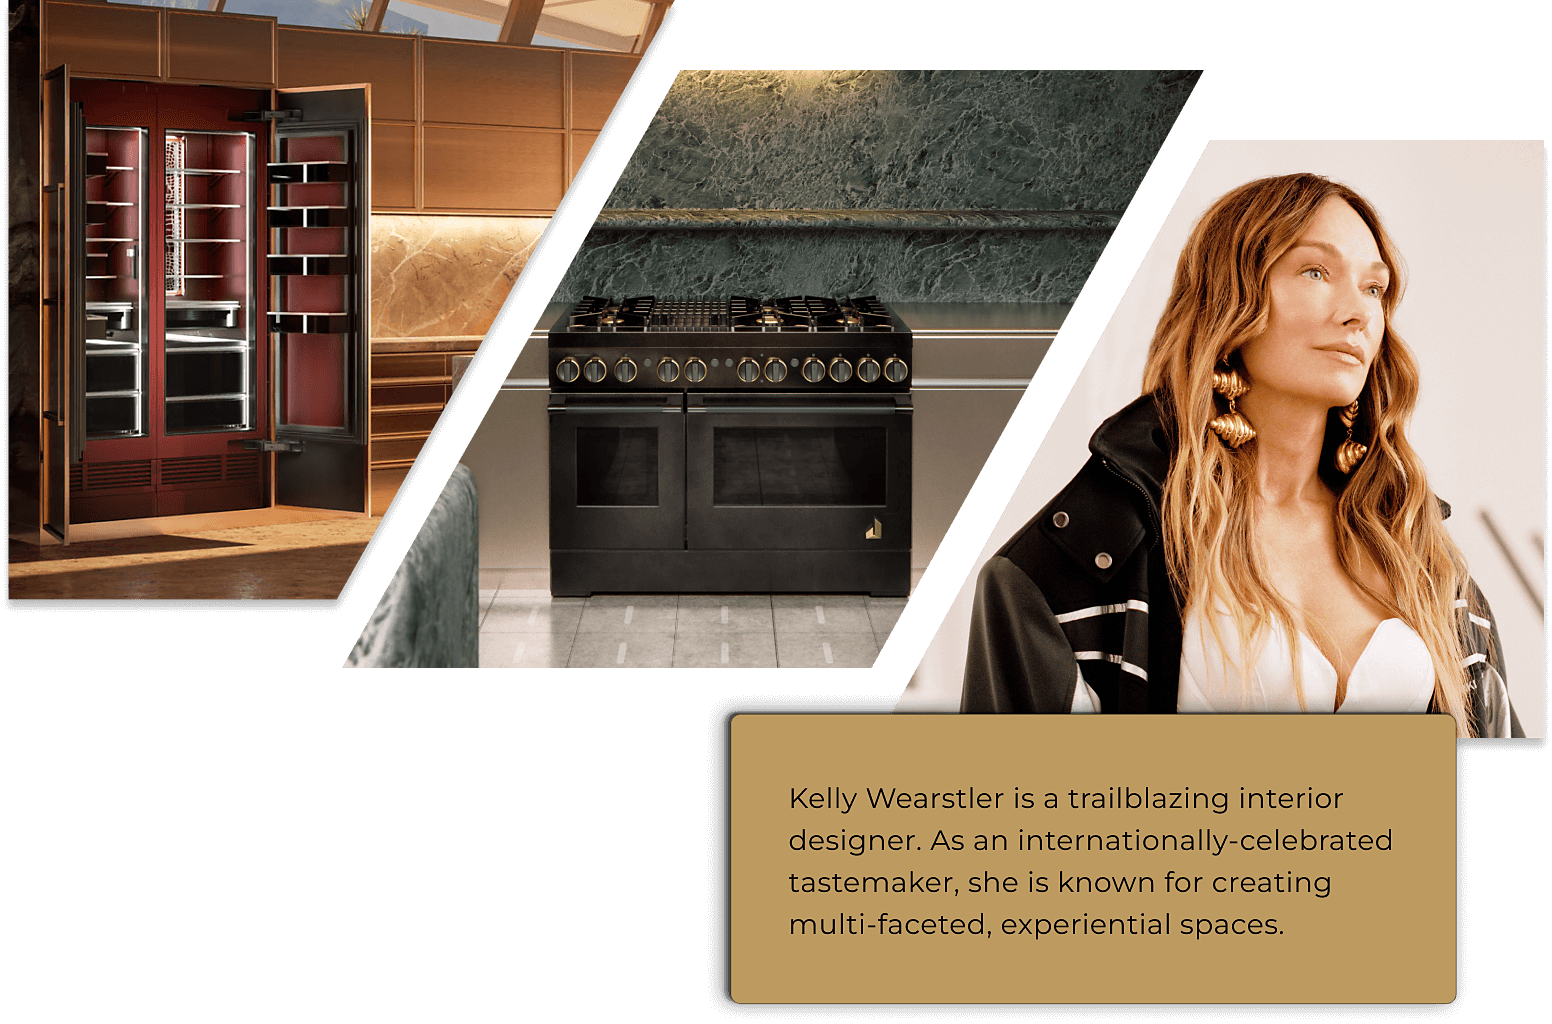 An image of Kelly Wearstler overlayed with one of the kitchen she designed